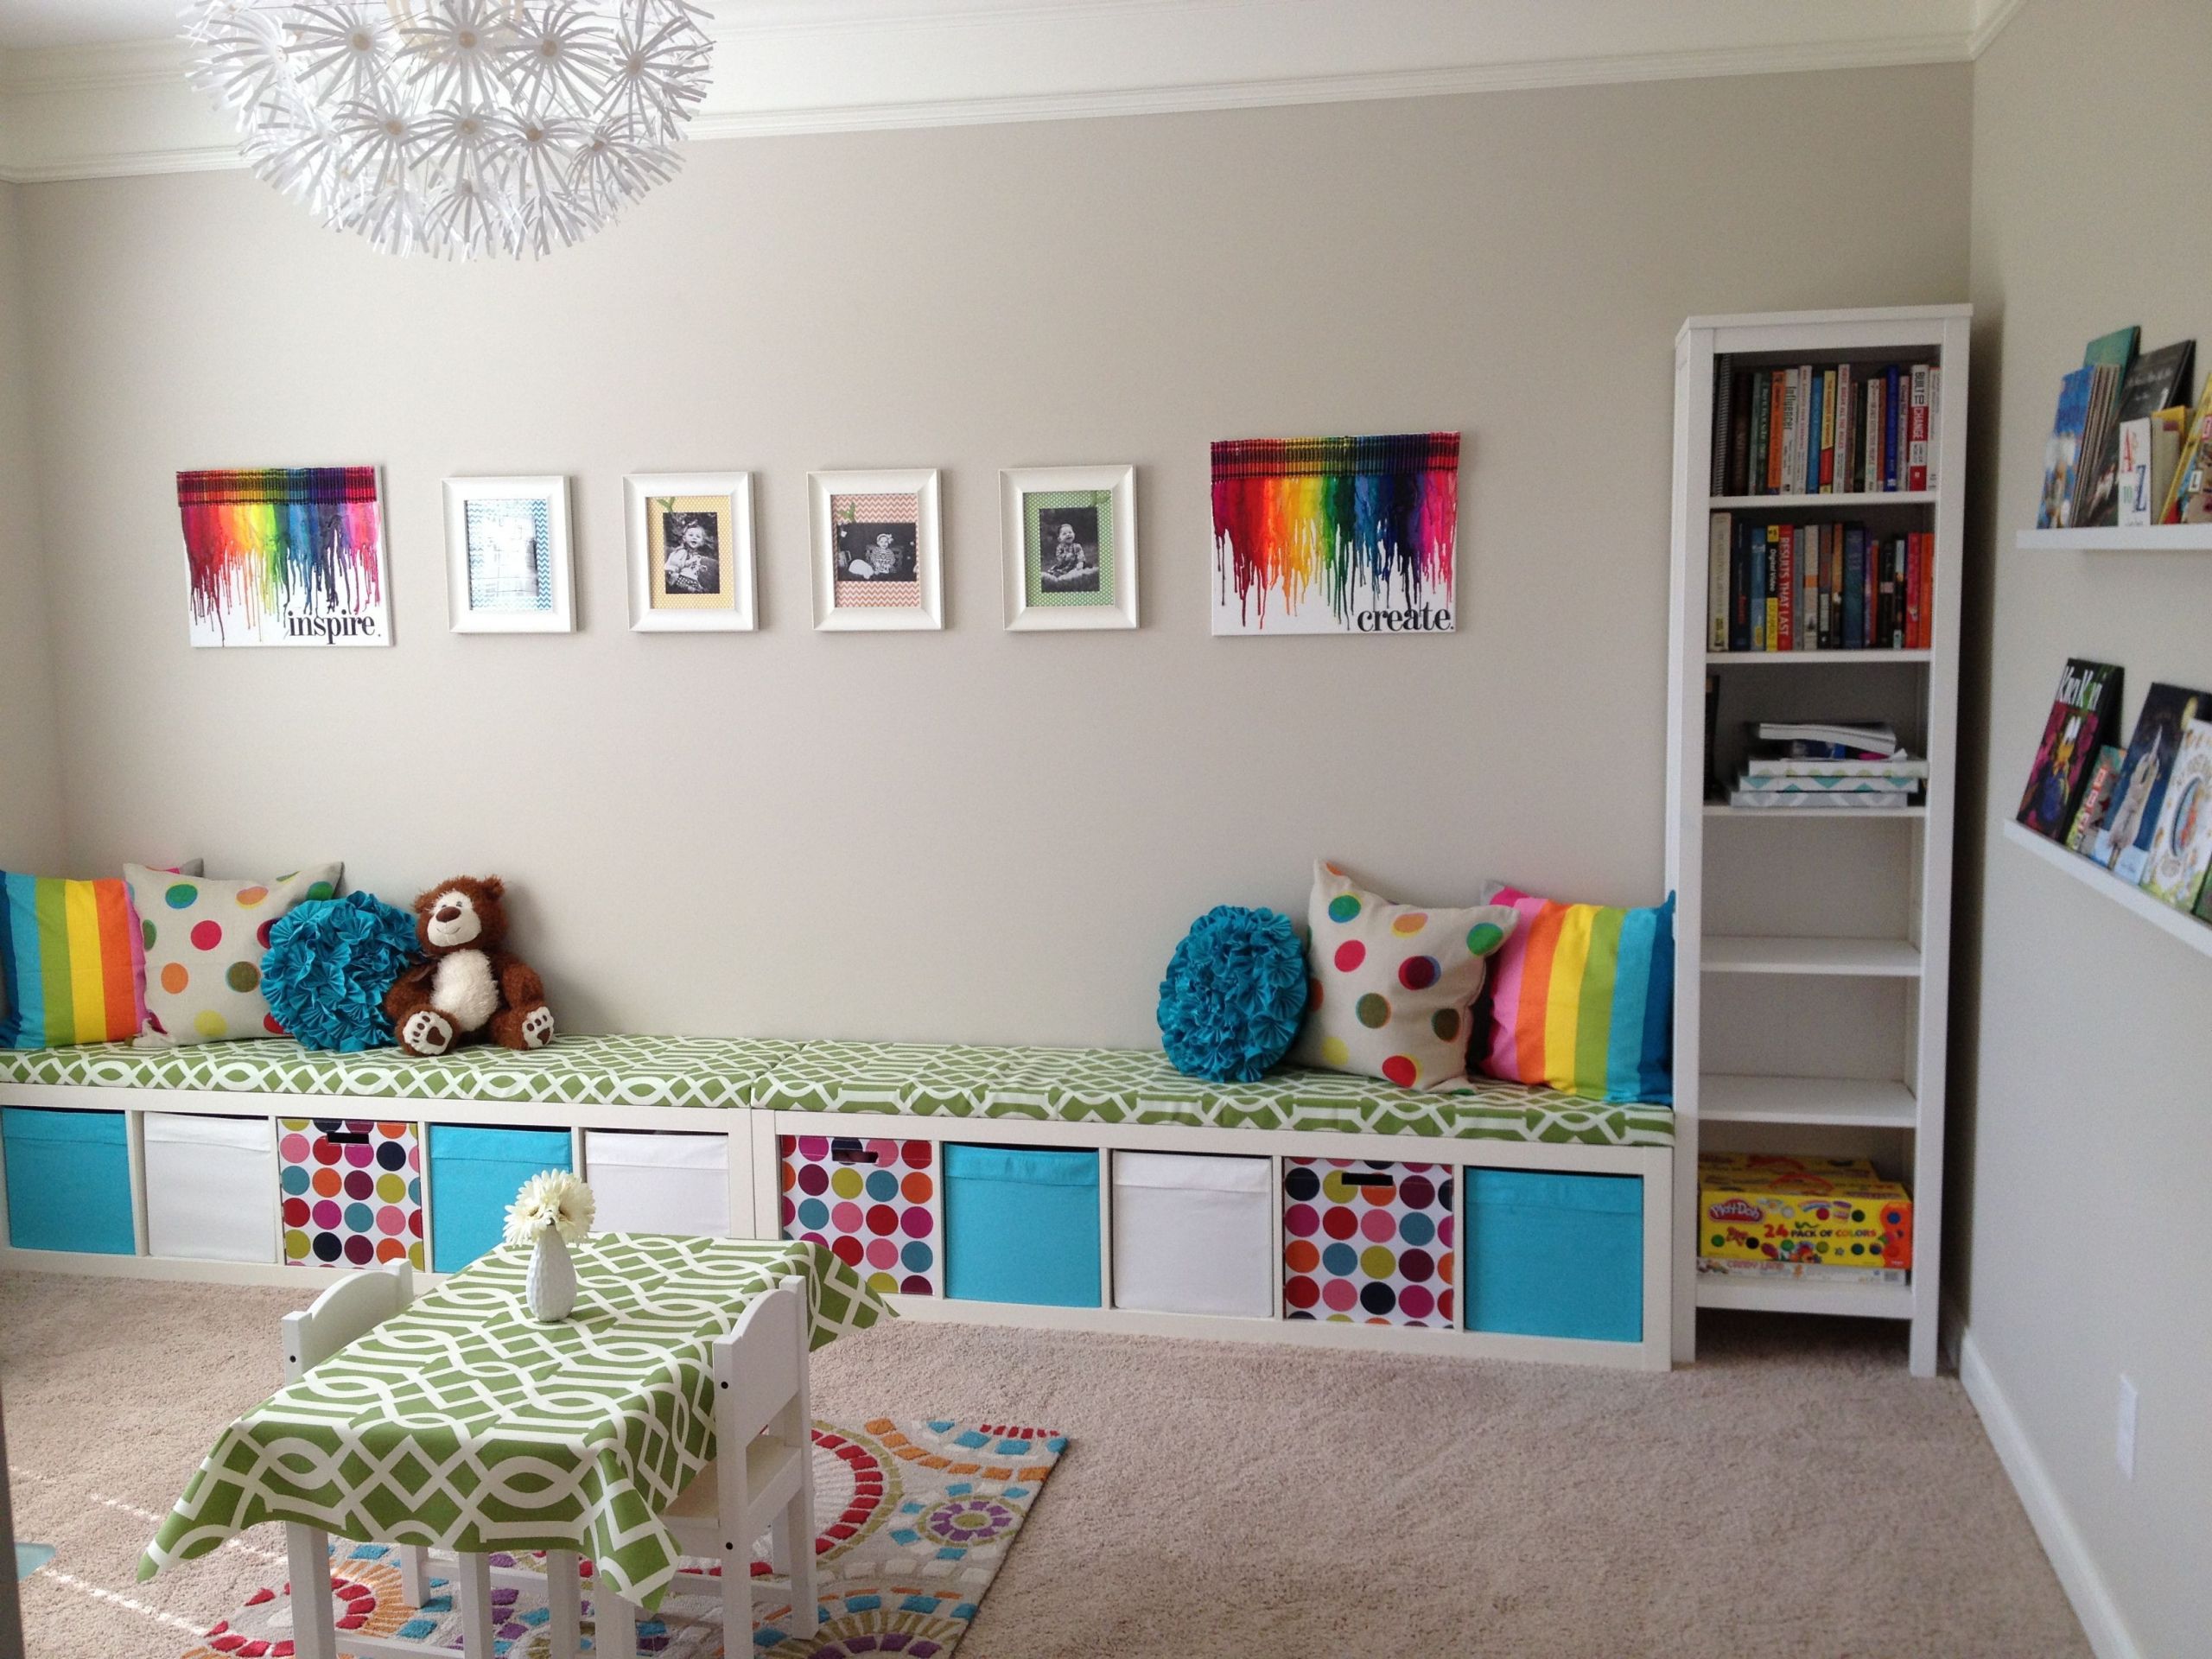 Family Room Kids Playroom
 5 Smart and Creative Playroom Ideas on a Bud for the